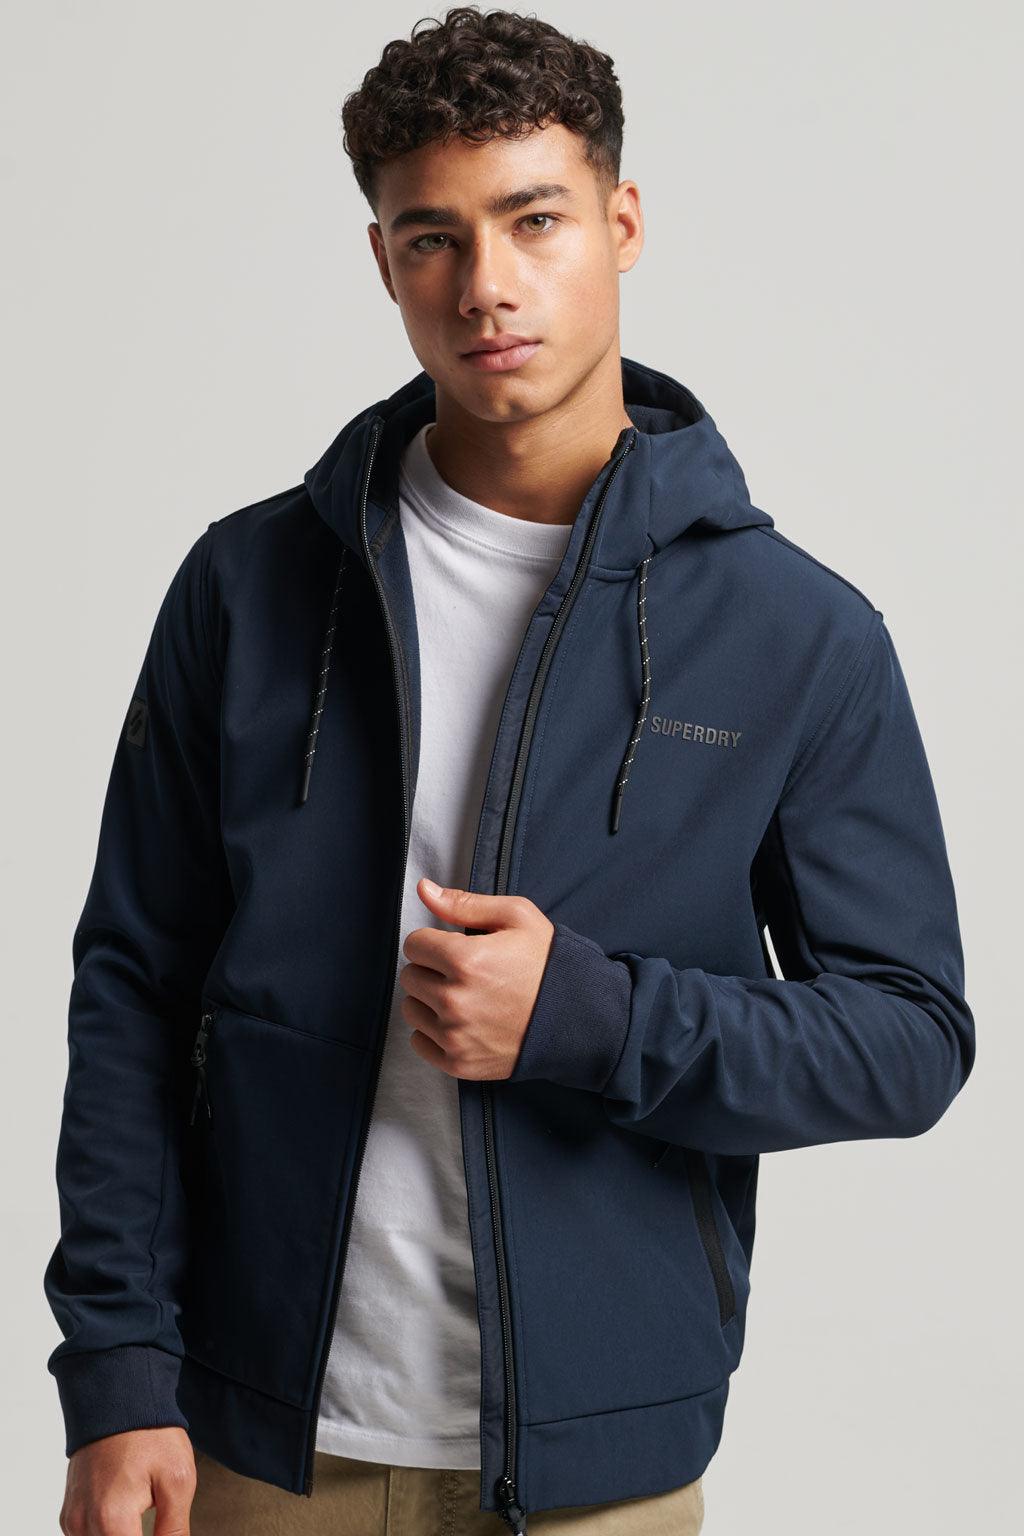 Superdry jack | Big Boss | the menswear concept